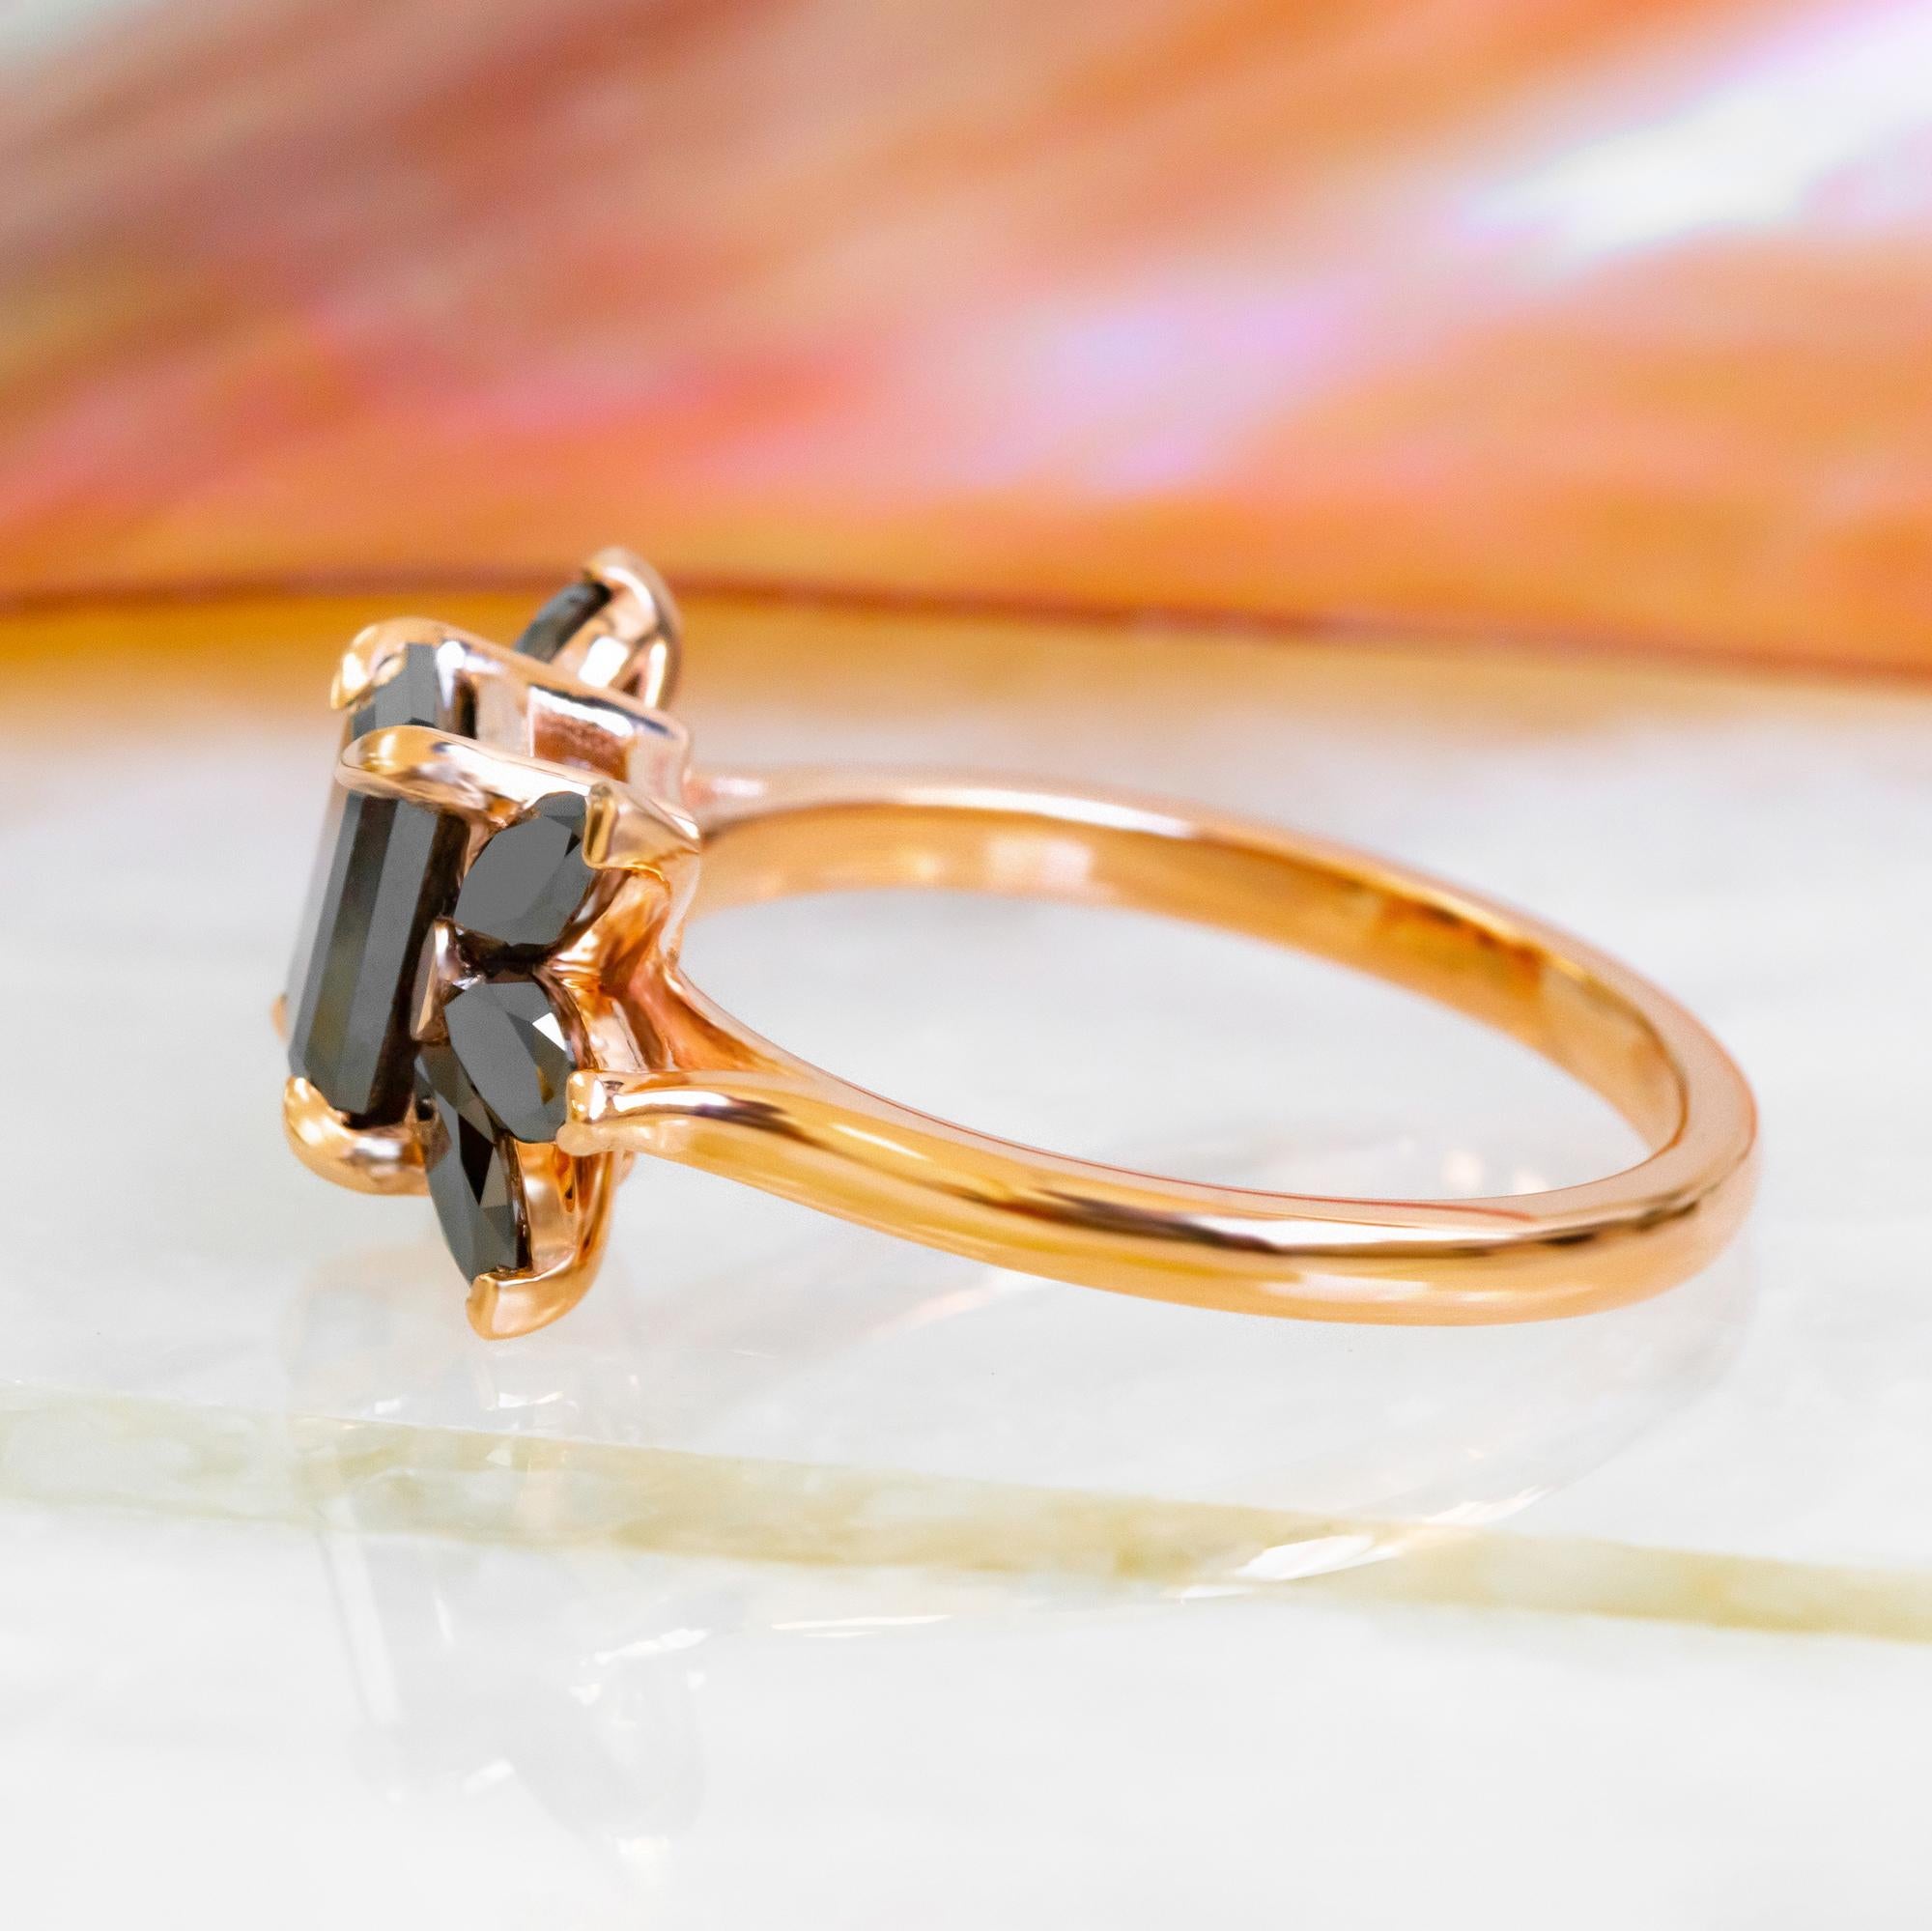 Beautiful Black Emerald Diamond Engagement Ring set With Natural Black Diamond in 14K Rose Gold Cluster Ring, Emerald and Marquise Black Diamond
DianRafaelJewelry Unique Black Ice collection

---------Item Specifications-------

-Total Carat Weight: